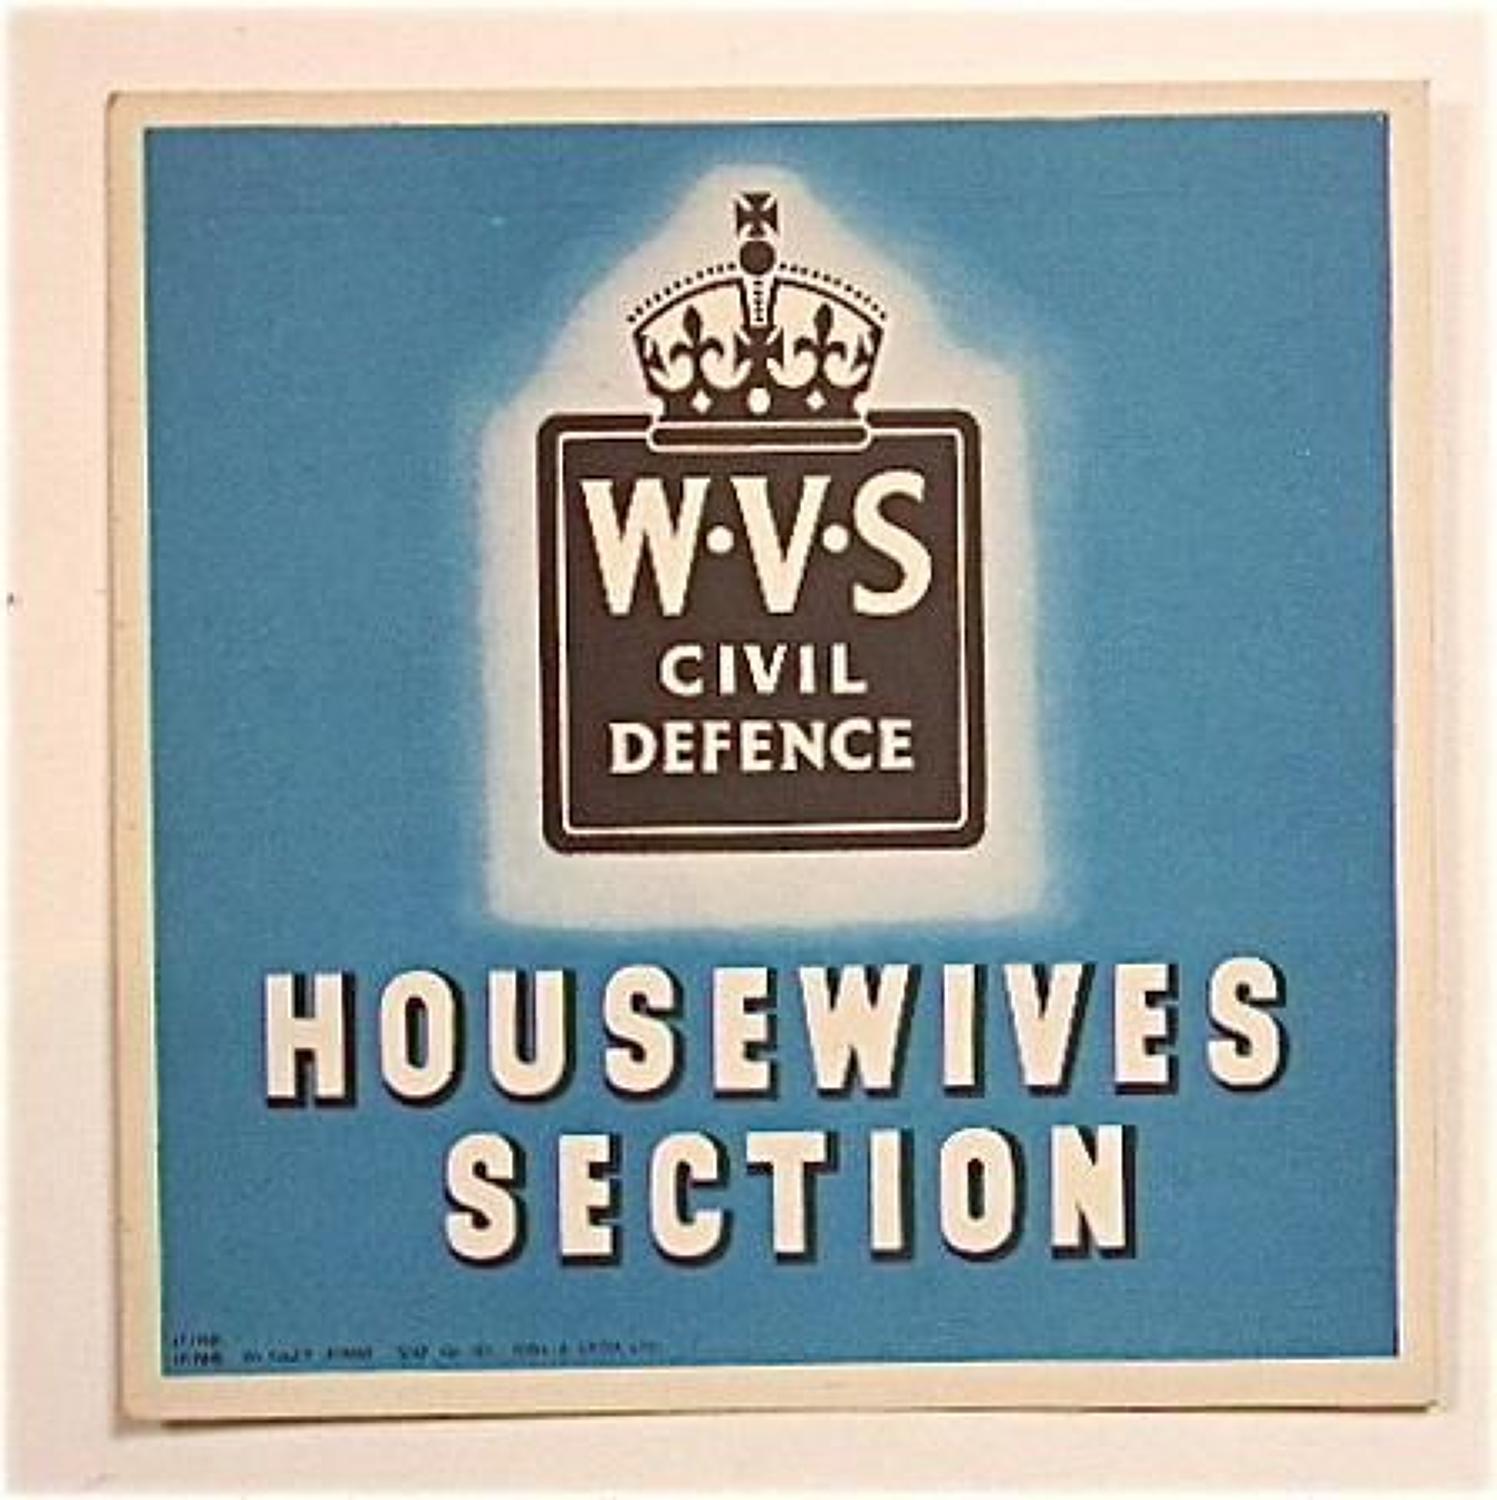 WW2 WVS Home Front Housewives Section Window Card.